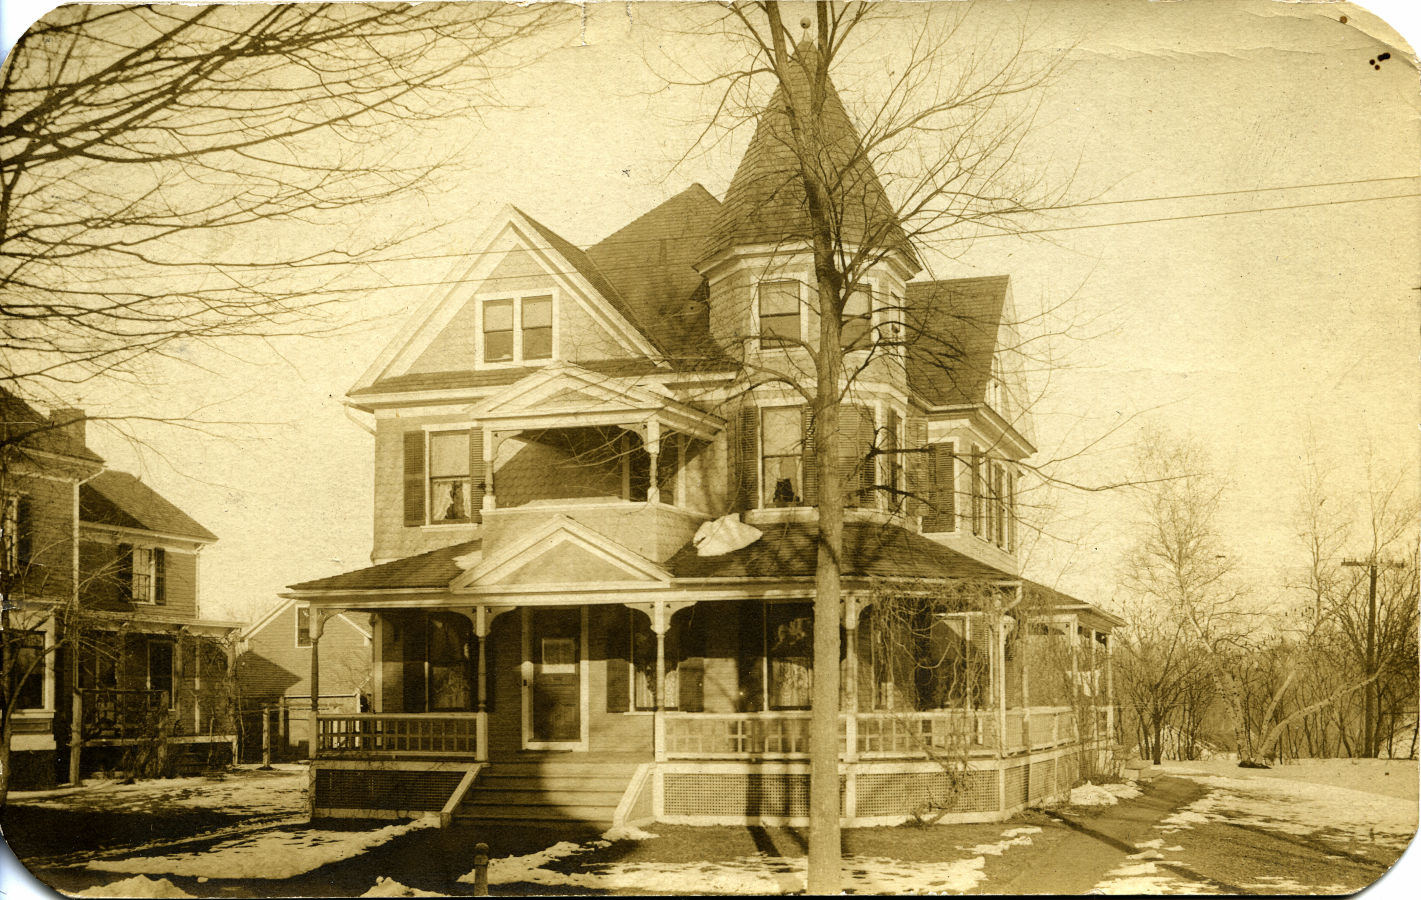 Unknown house - likely Westfield